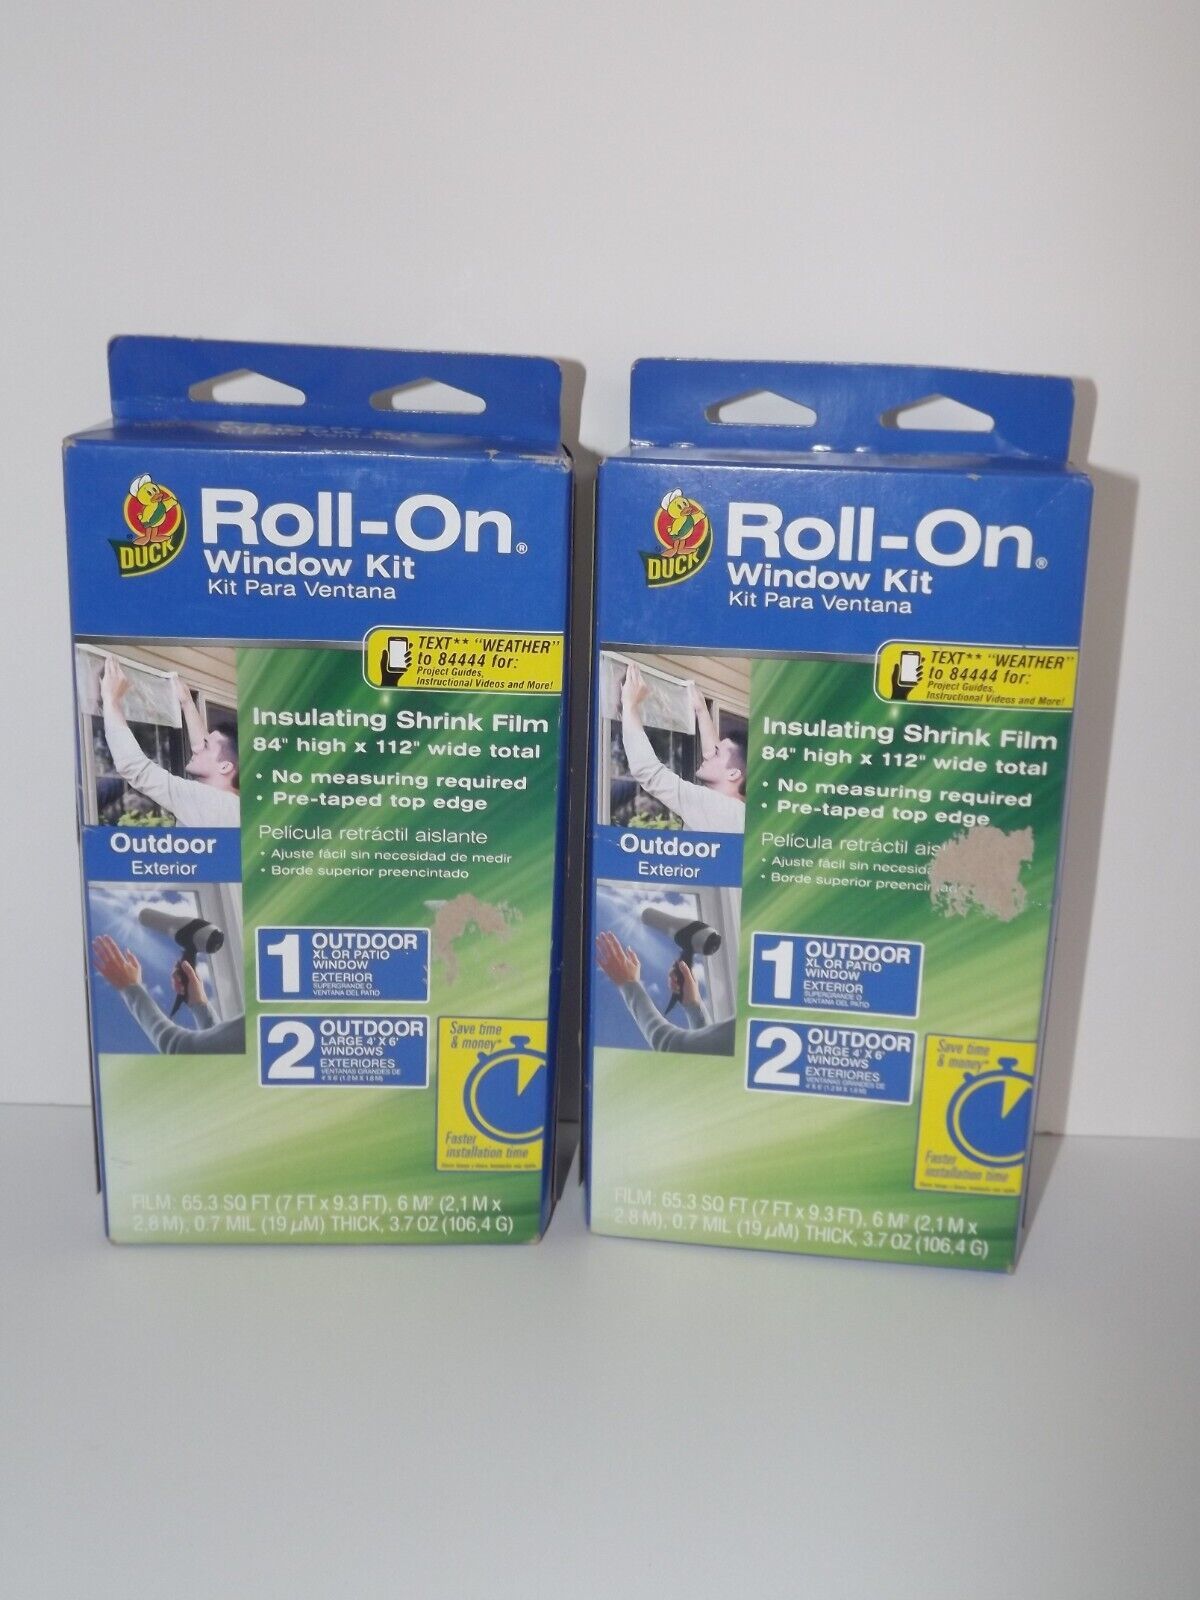 Primary image for 2 Boxes Duck Roll-On Window Kit Insulating Shrink Film 84" x 112" New (U)